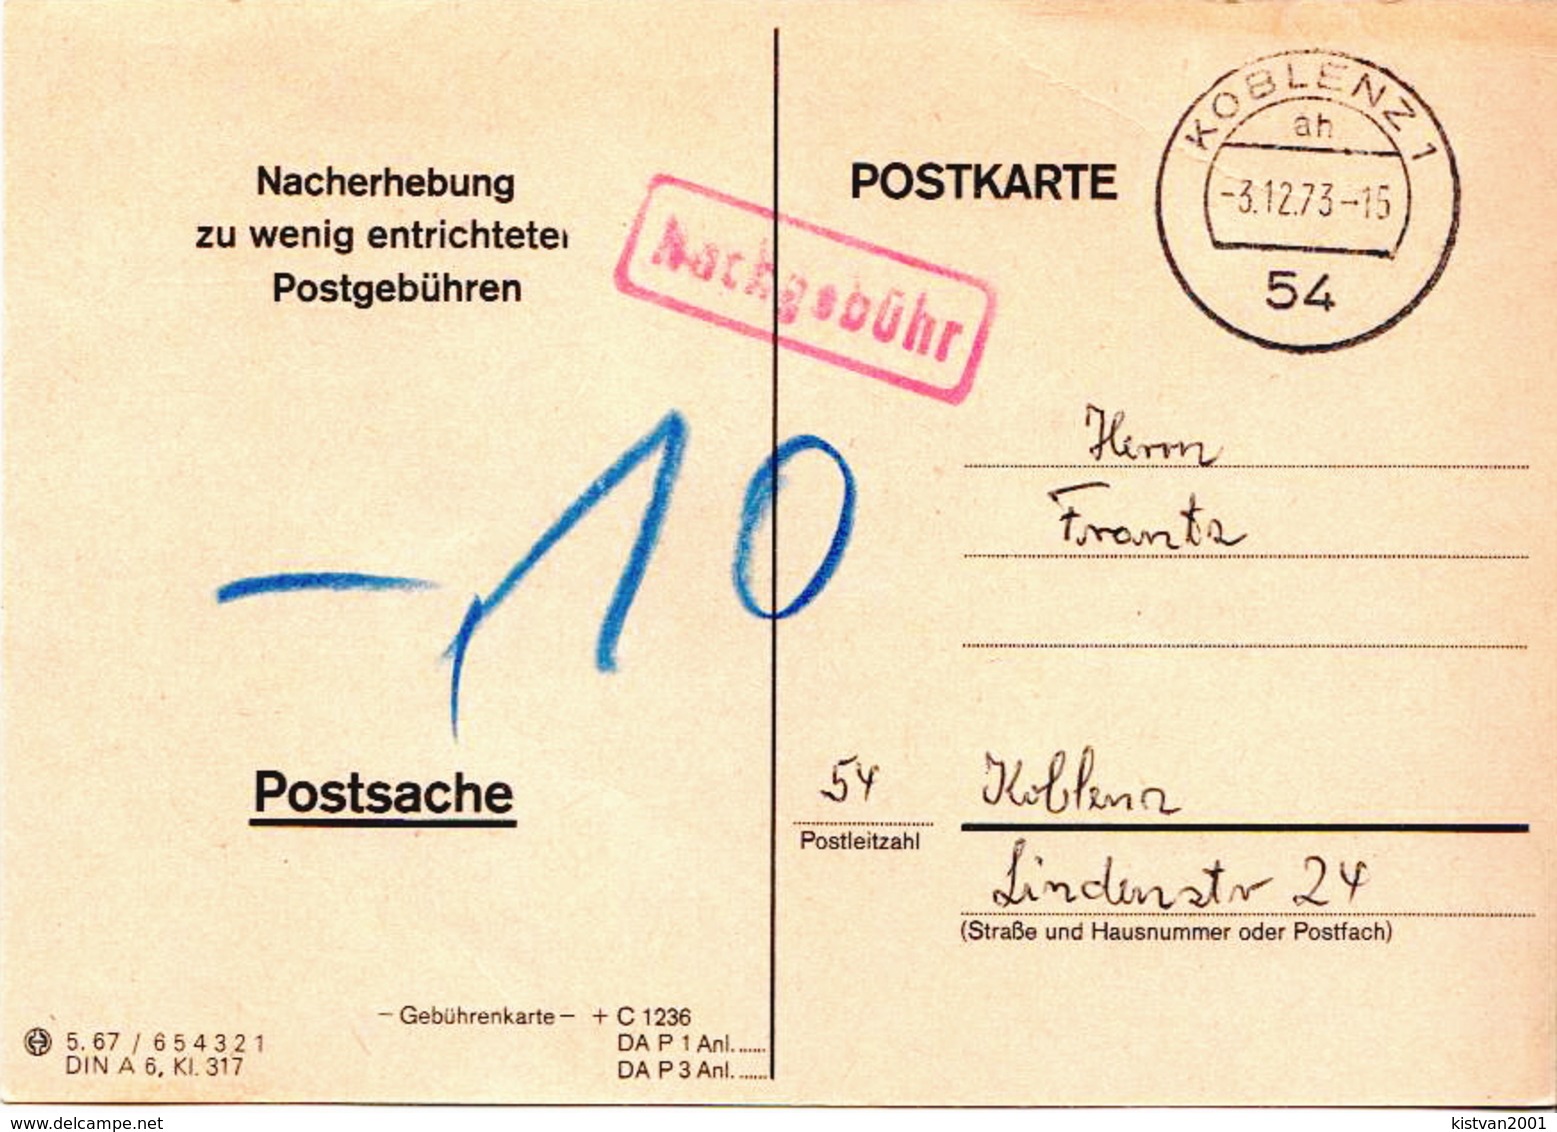 Postal History: Germany Postcard From 1973 Koblenz Cancel Only, No Stamp - Covers & Documents